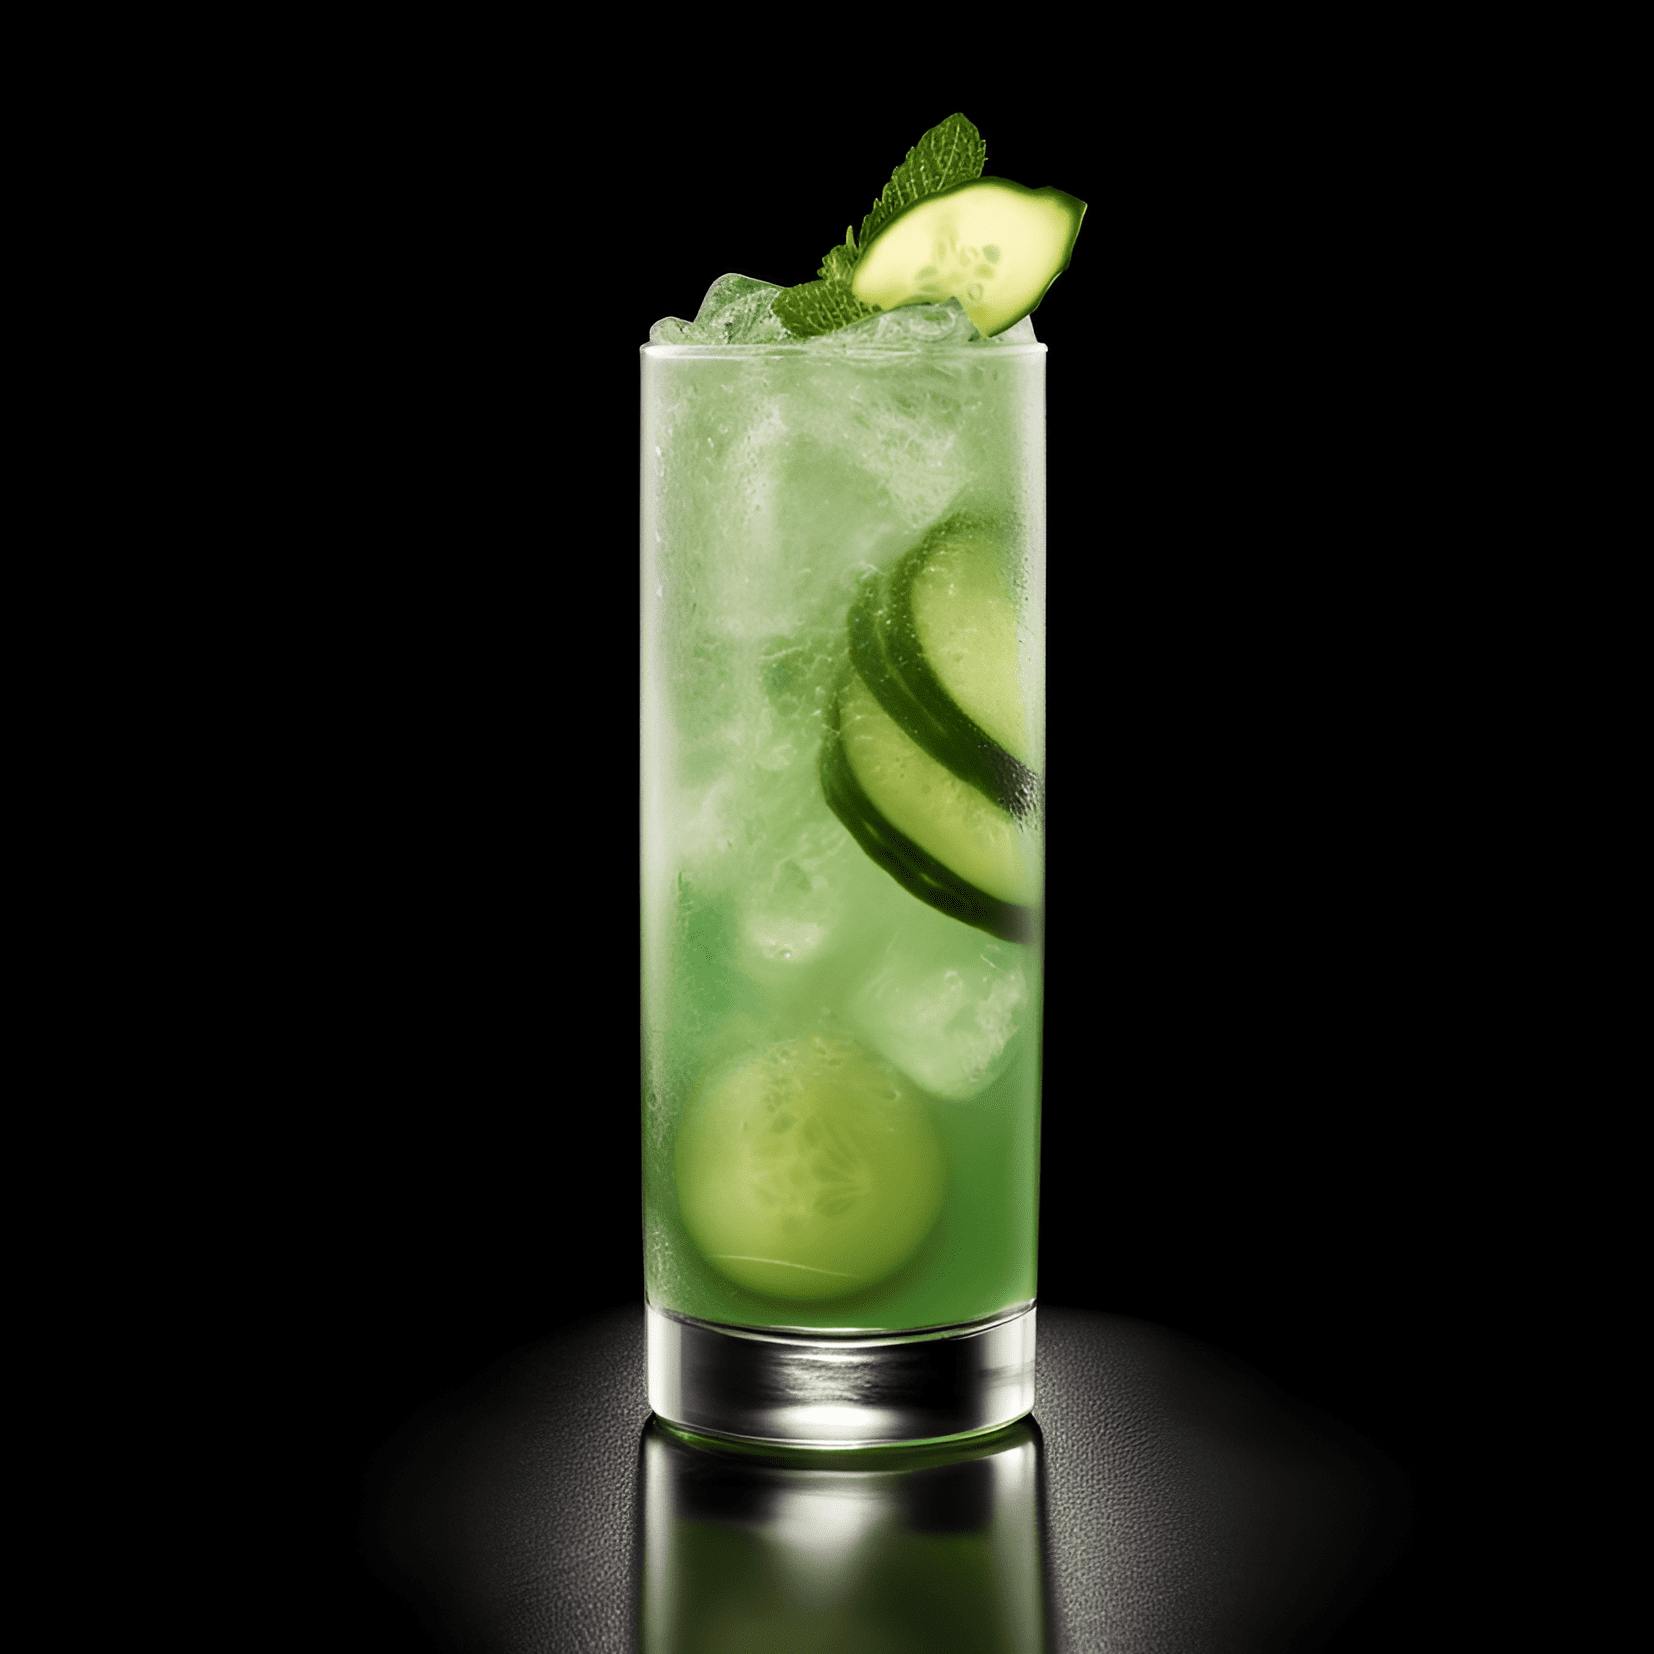 The Cucumber Cooler is a crisp, refreshing, and slightly sweet cocktail with a hint of tartness from the lime juice. It has a light, clean taste with a subtle cucumber flavor.